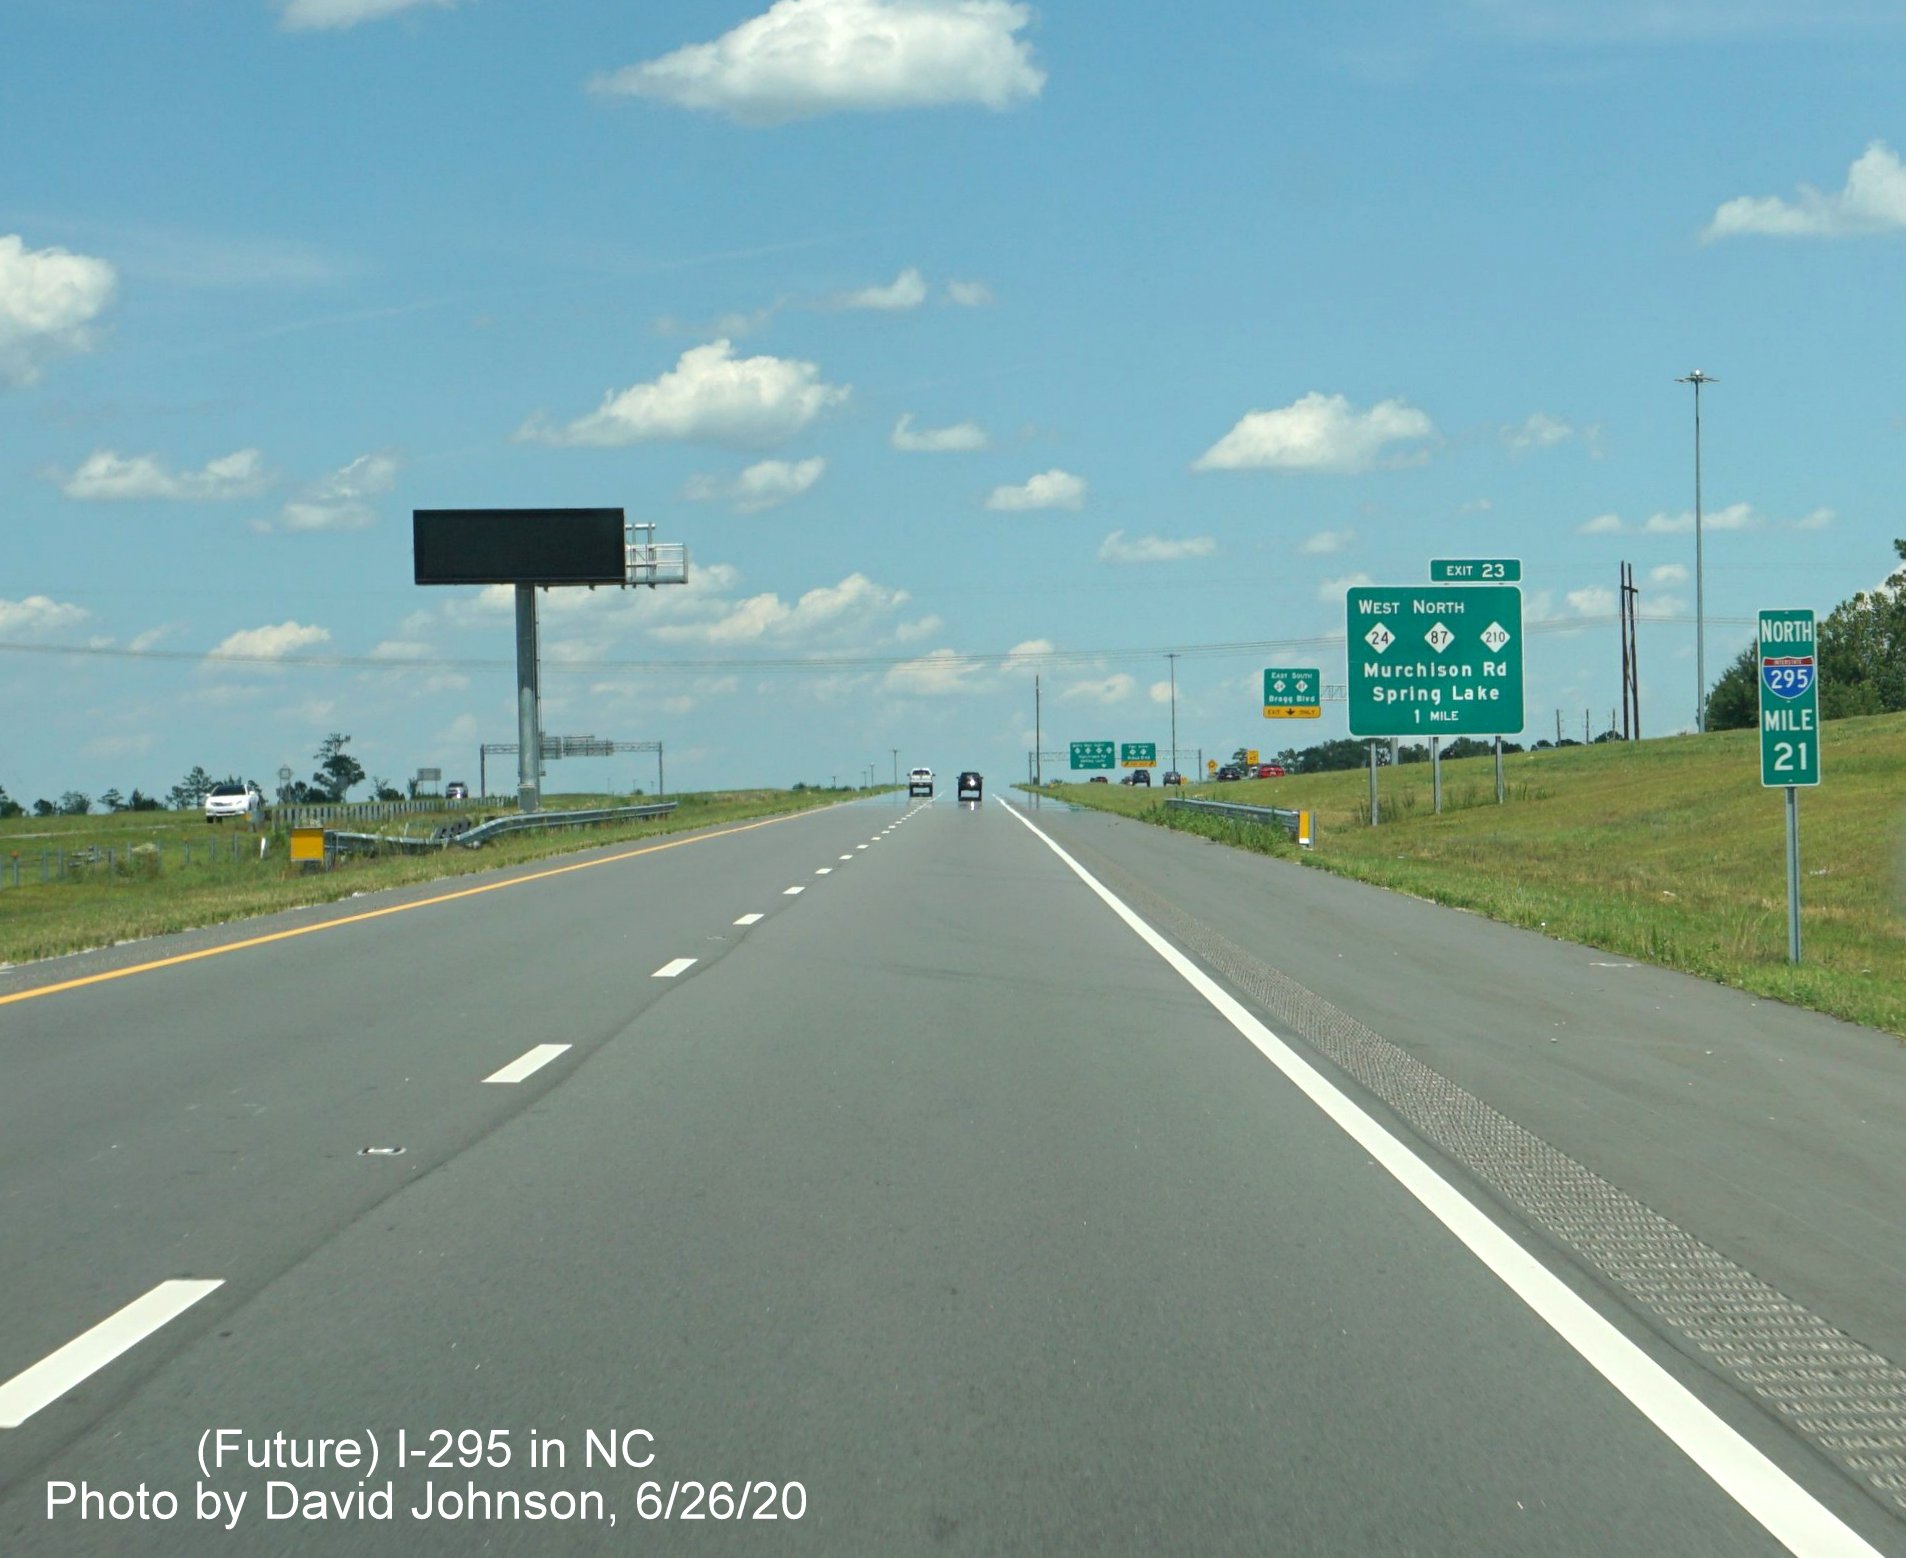 Image of I-295 North mile marker approaching Murchison Road exit, by David Johnson June 2020